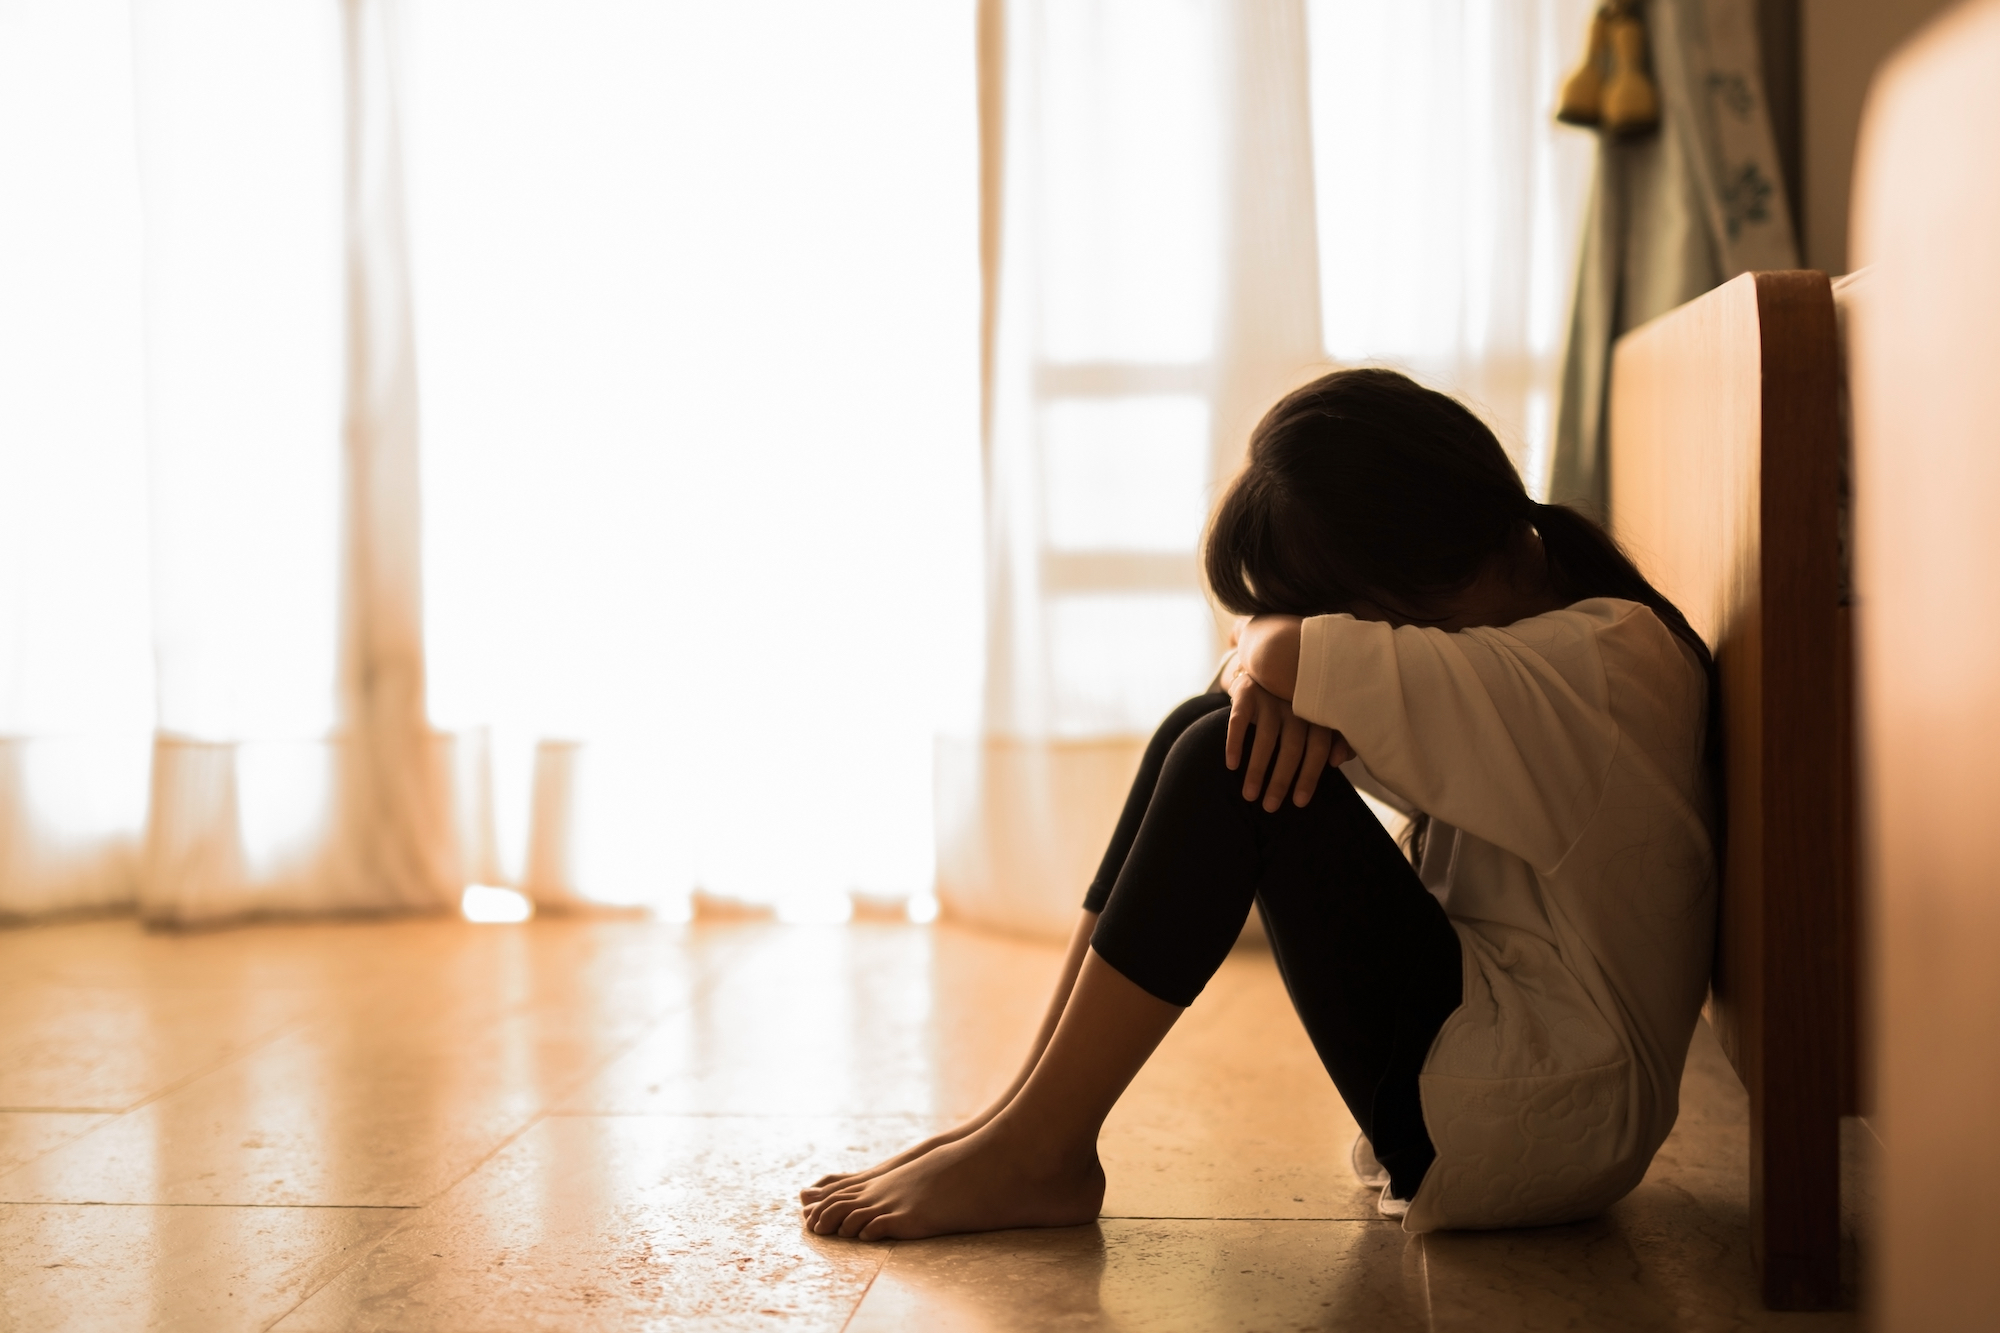 The child protection centre received 70 enquiries related to domestic violence last year